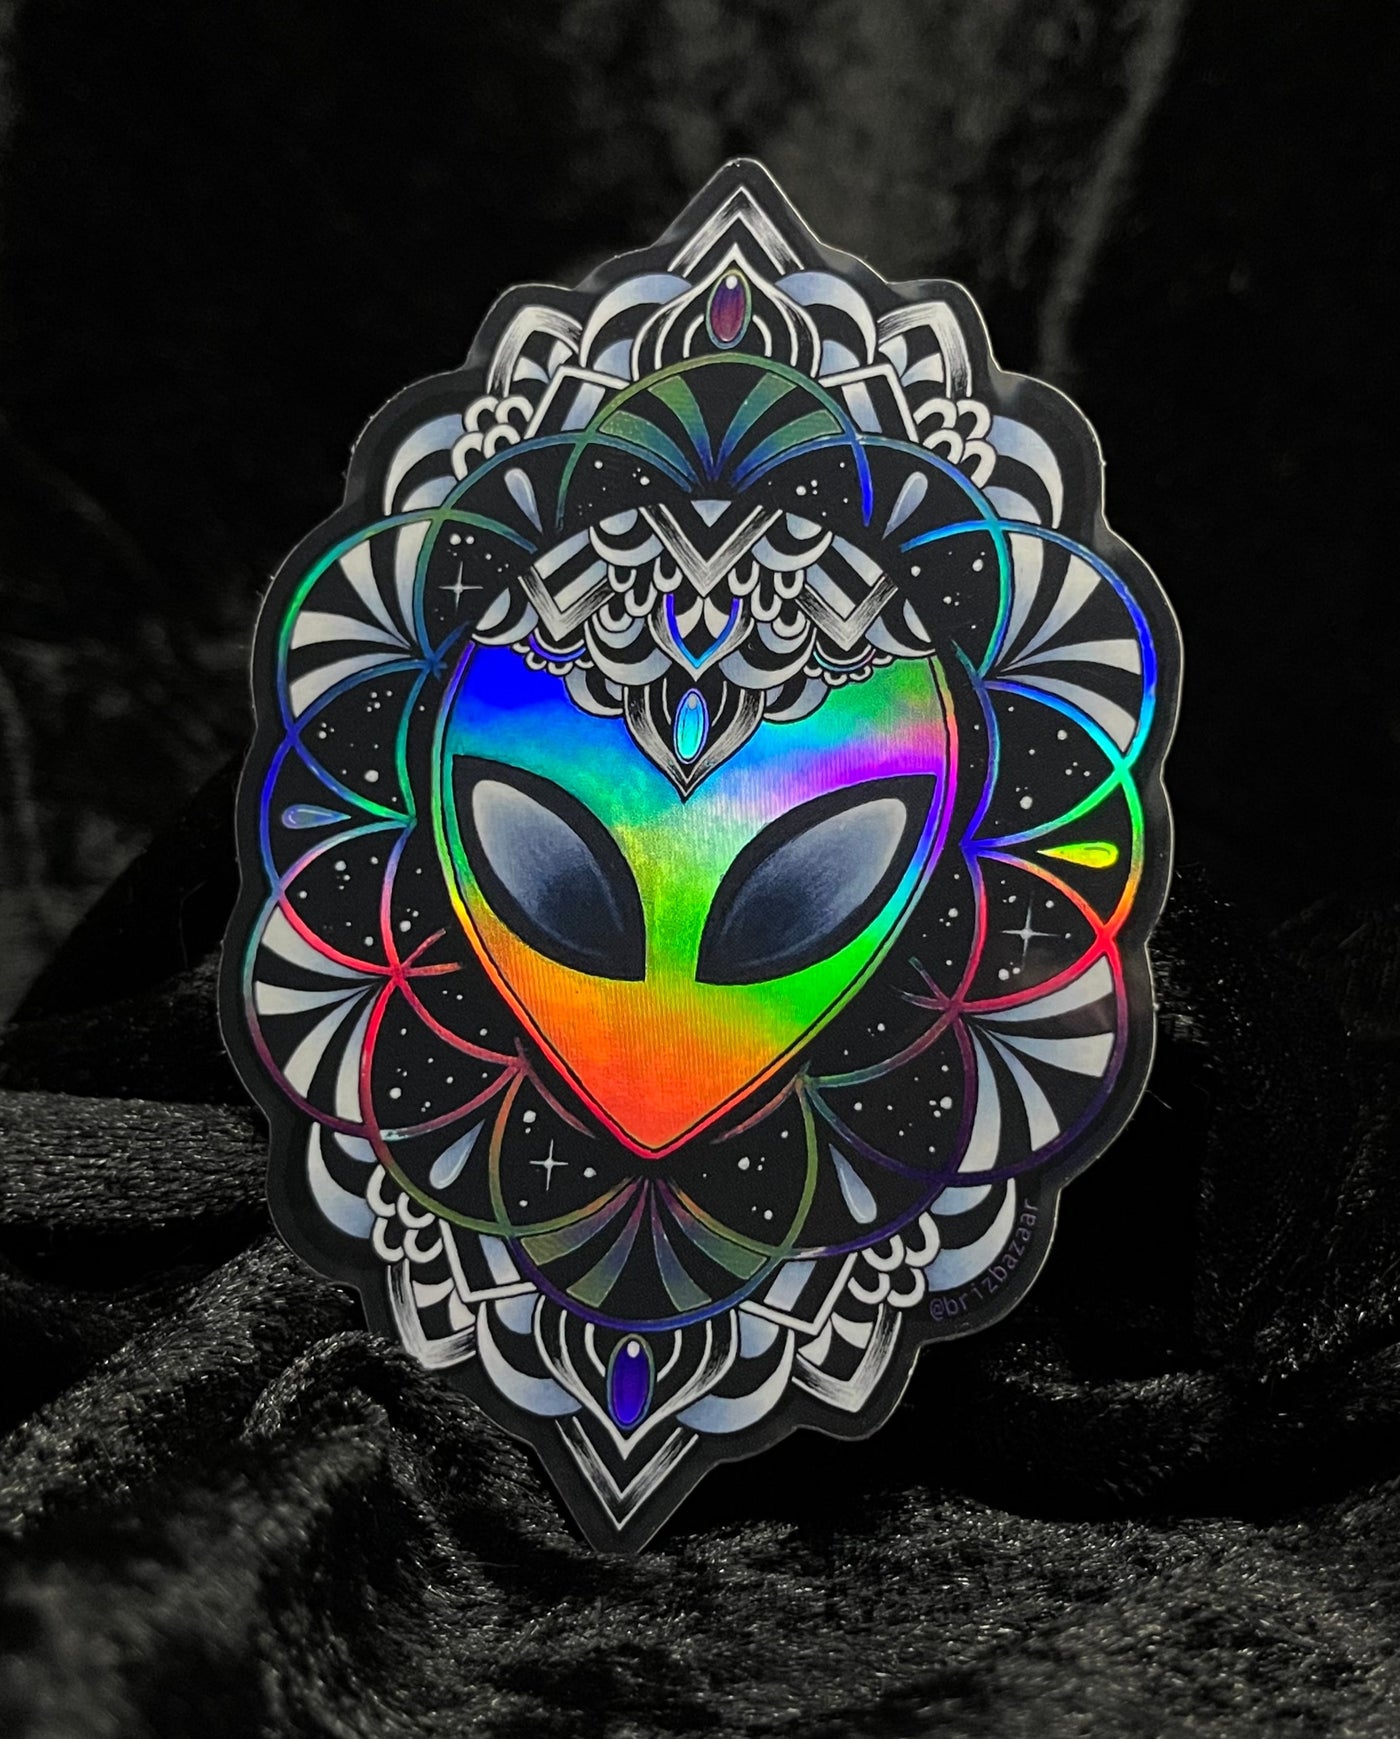 Holographic sticker of Conscious Cosmos